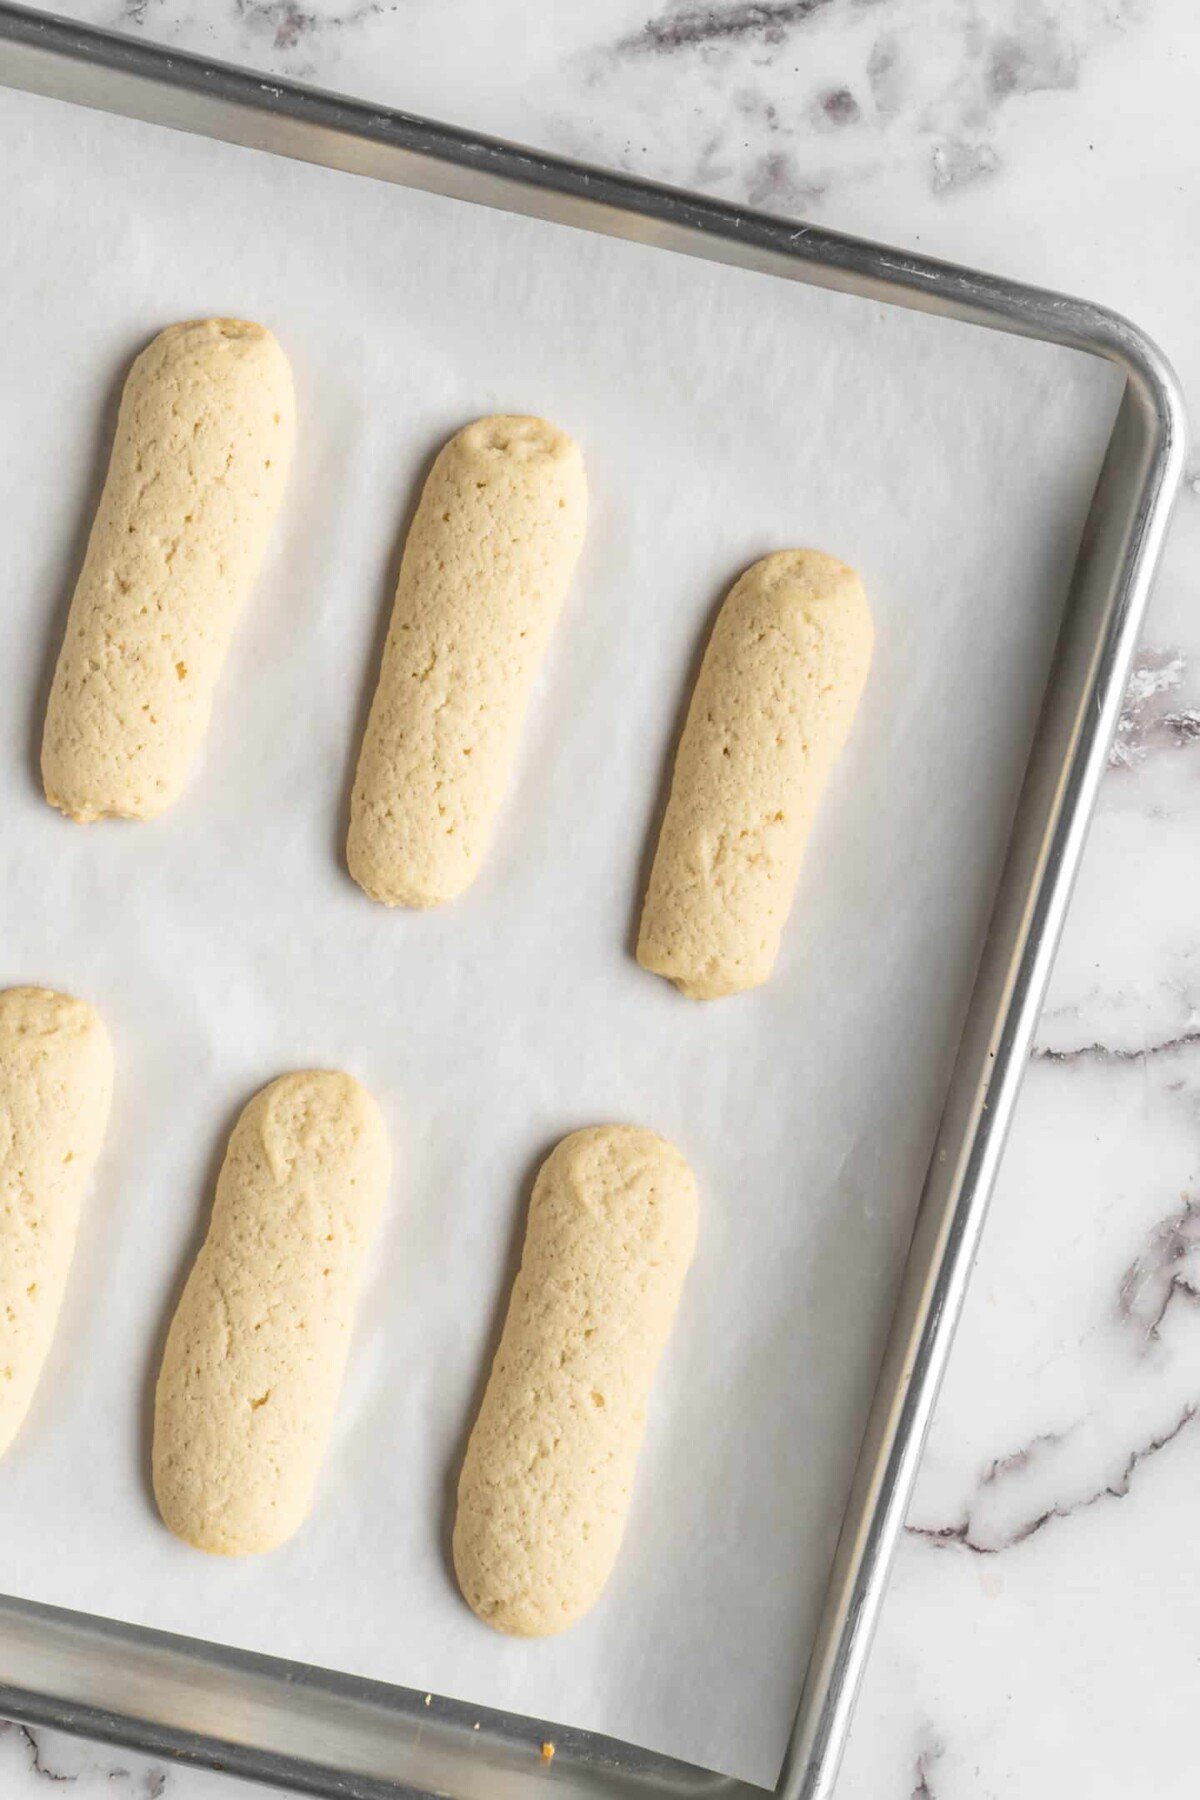 A baking sheet with cooked ladyfinger cookies on parchment paper